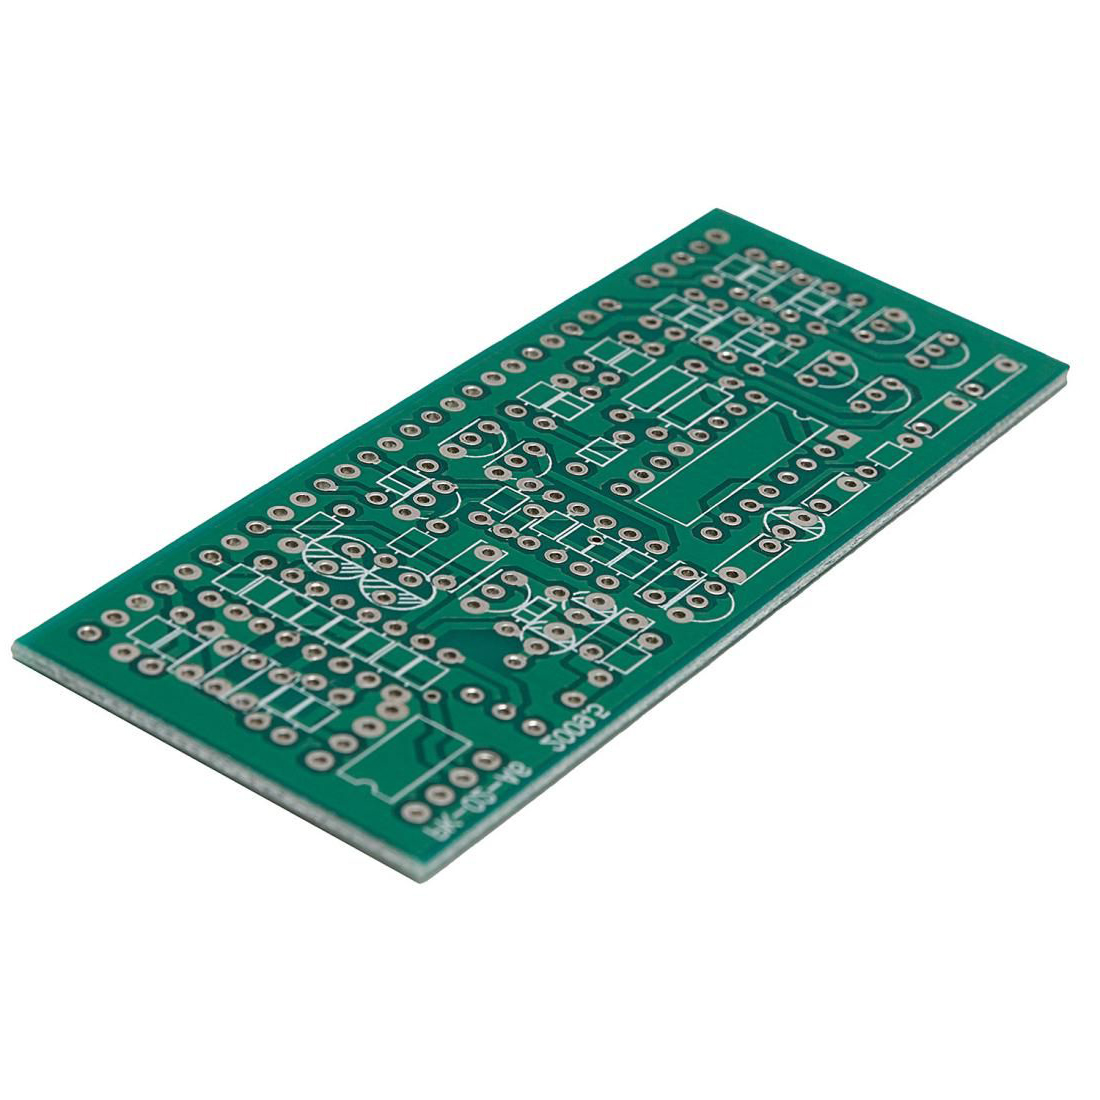 Single Sided Printed Circuit Boards